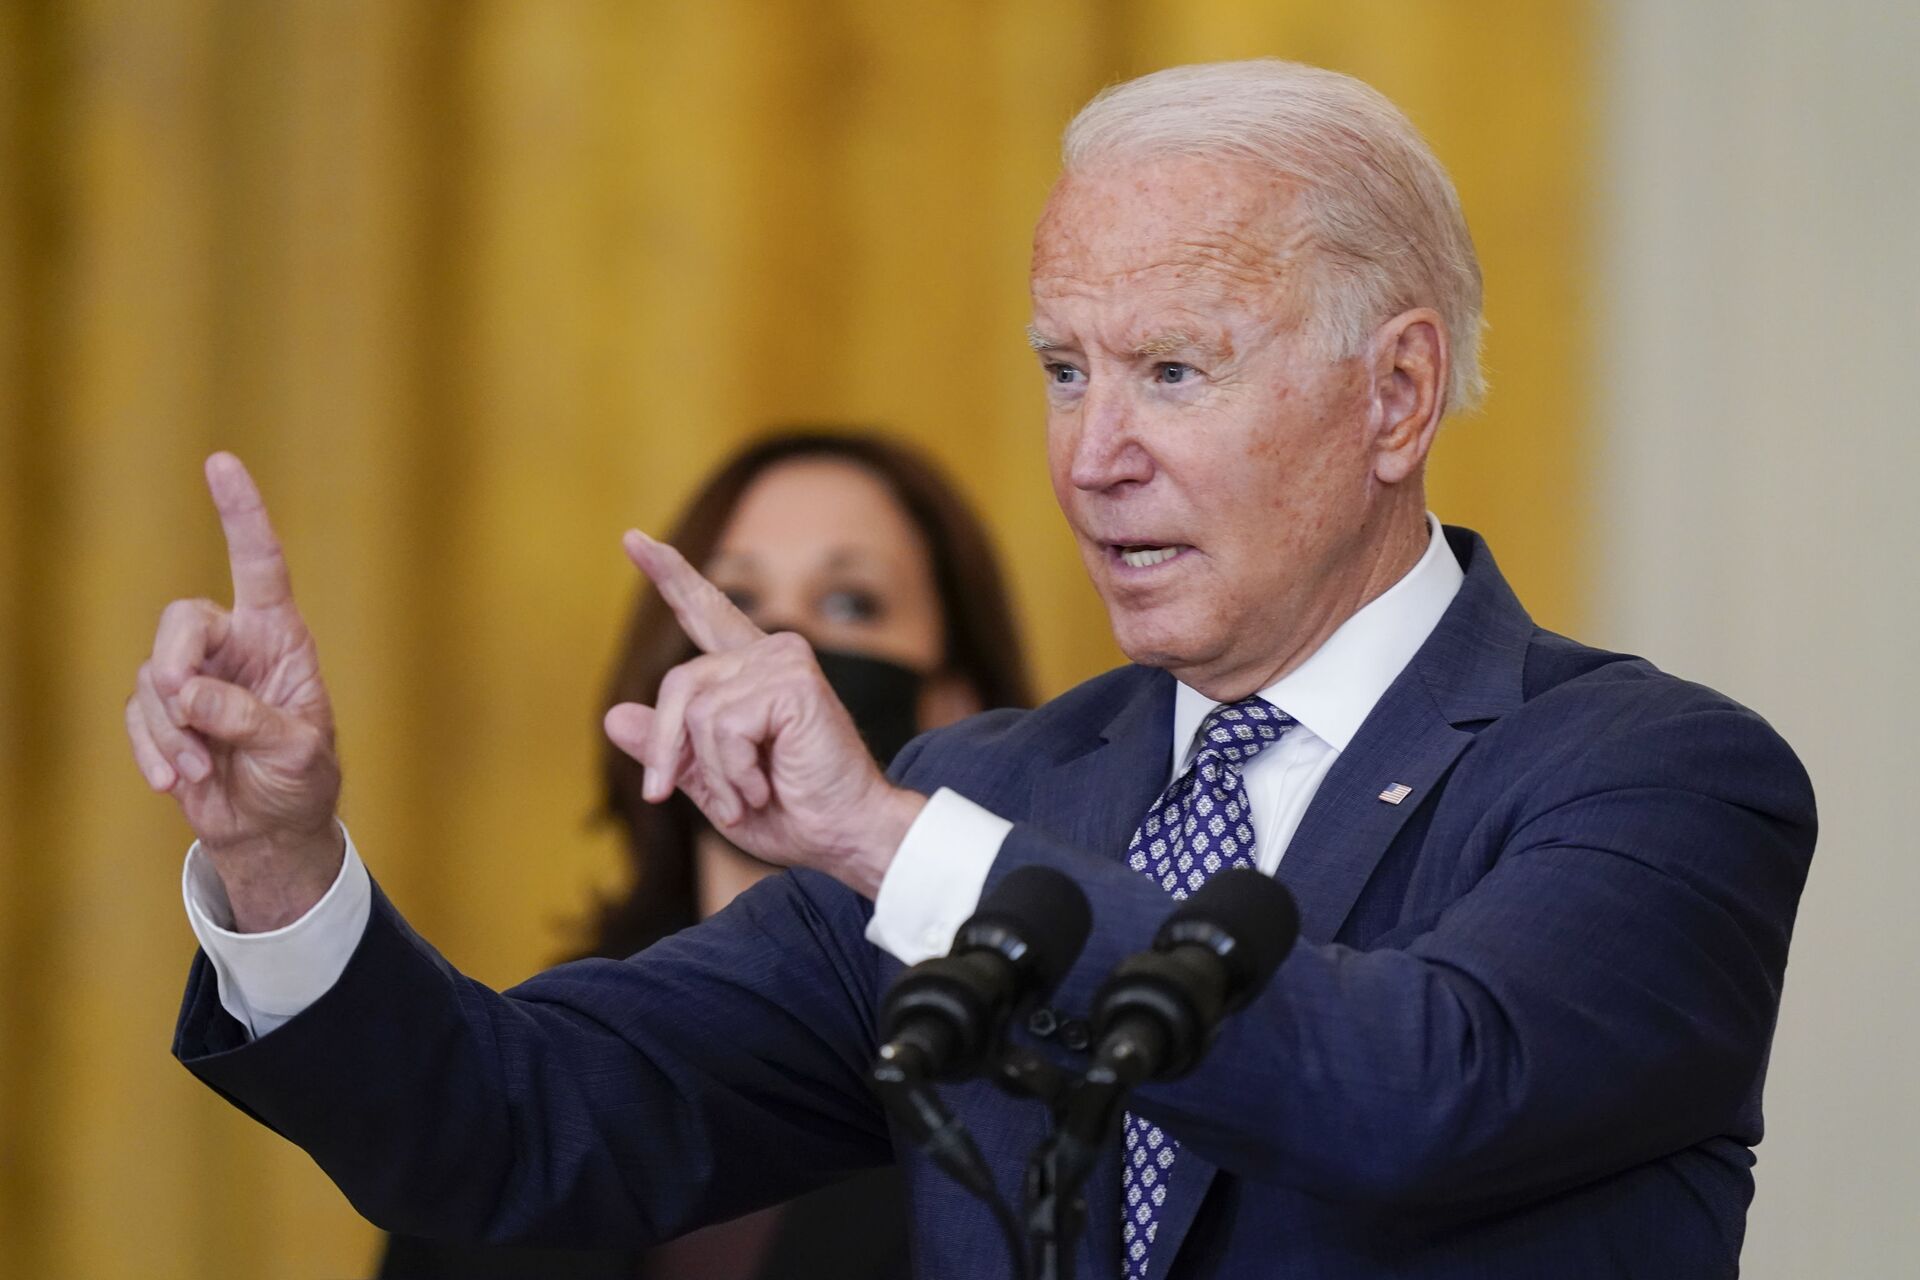 President Joe Biden answers questions from members of the media as he speaks about the evacuation of American citizens, their families, SIV applicants and vulnerable Afghans in the East Room of the White House, Friday, Aug. 20, 2021, in Washington.  - Sputnik International, 1920, 07.09.2021